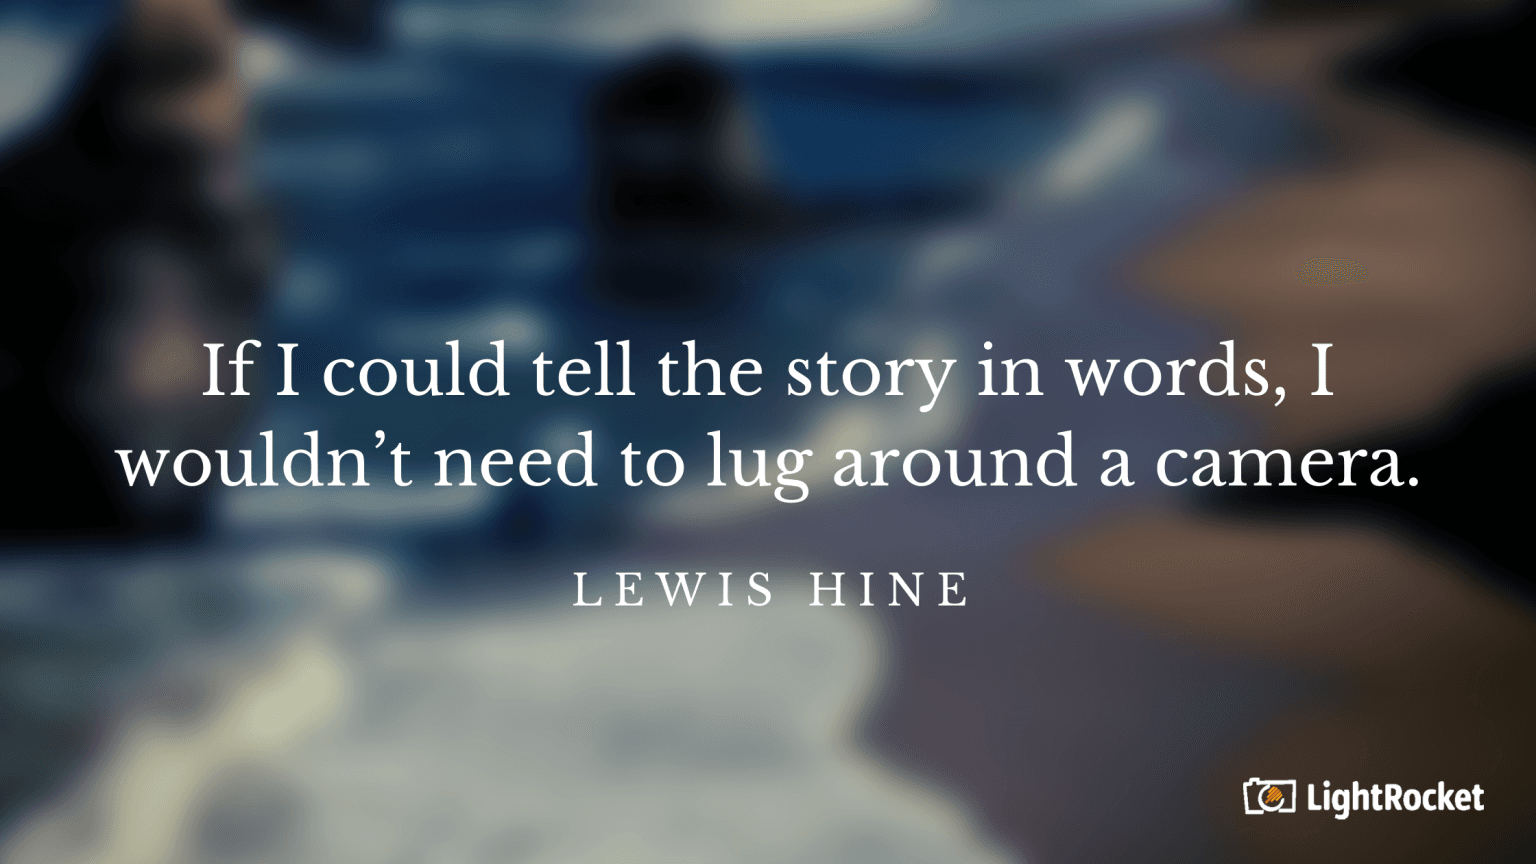 “If I could tell the story in words, I wouldn’t need to lug around a camera.” – Lewis Hine